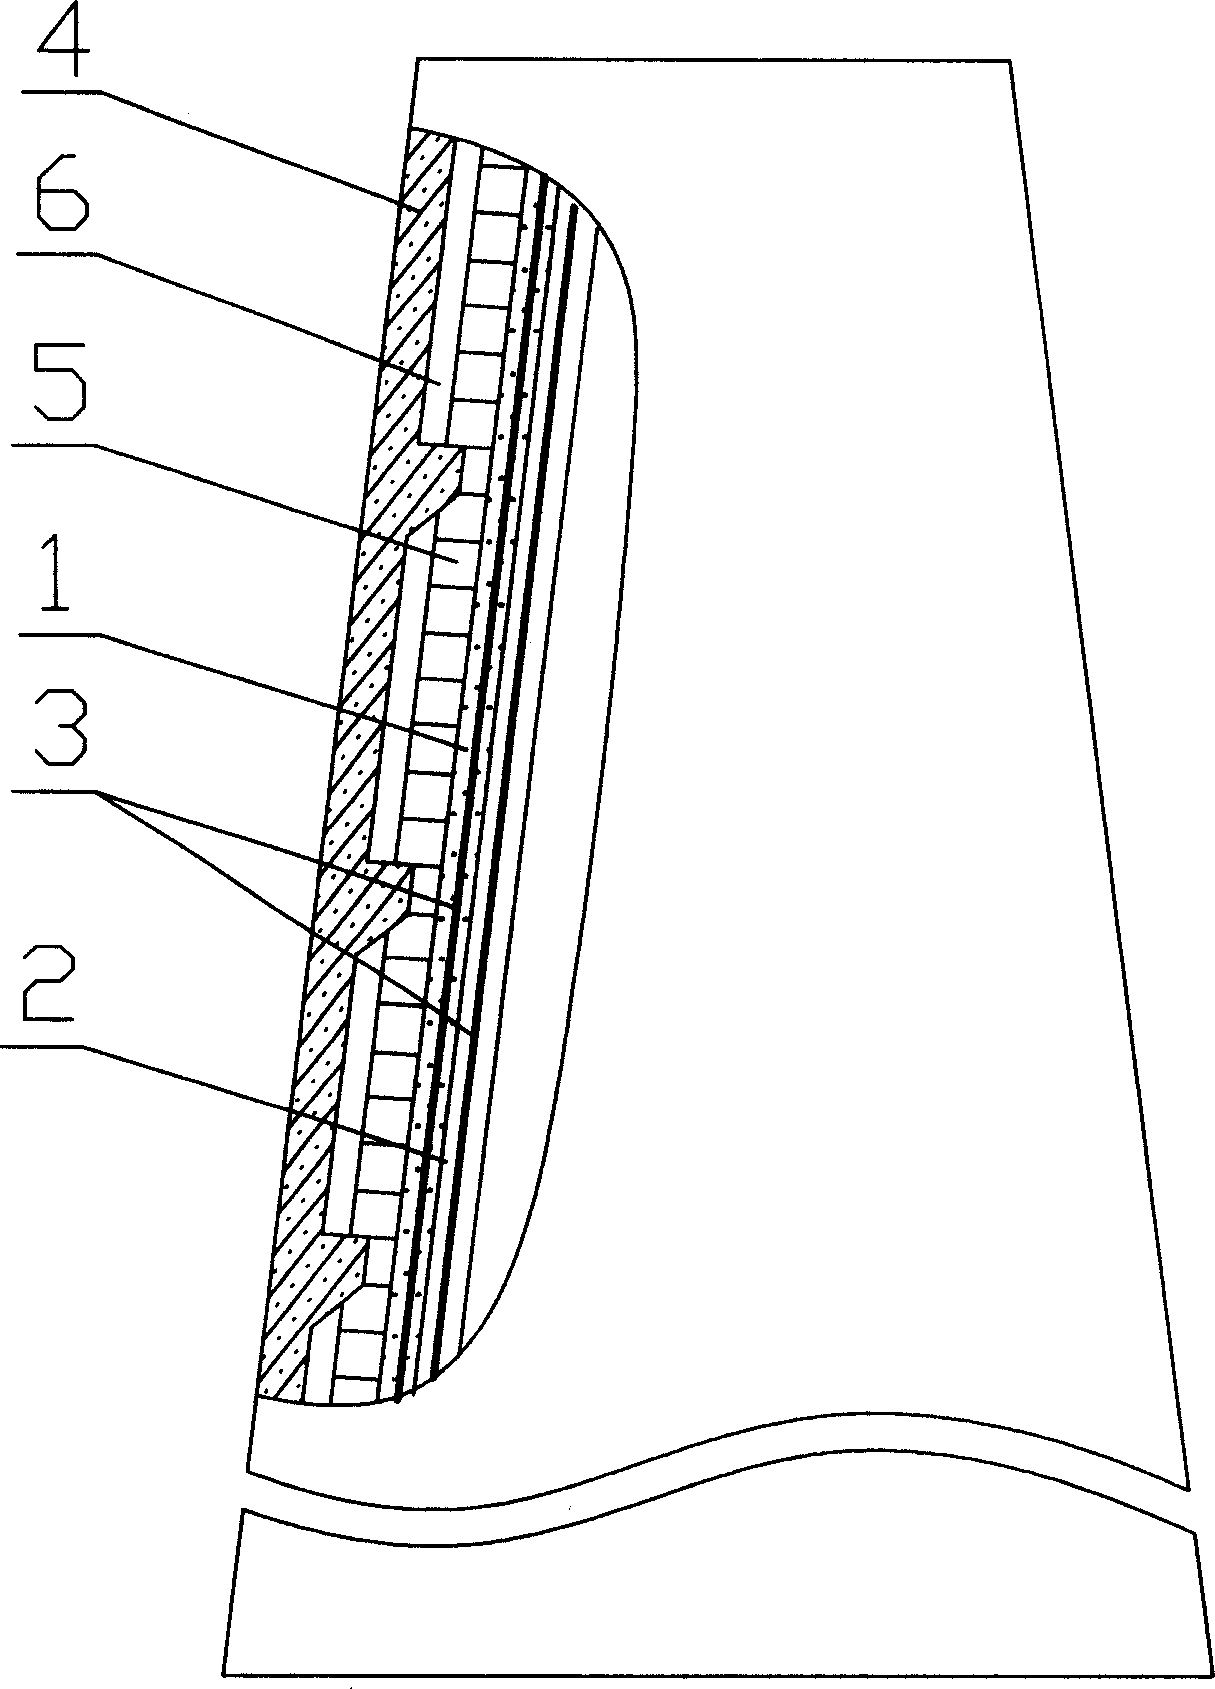 Boiler chimney body and method for forming its inner wall protection structure